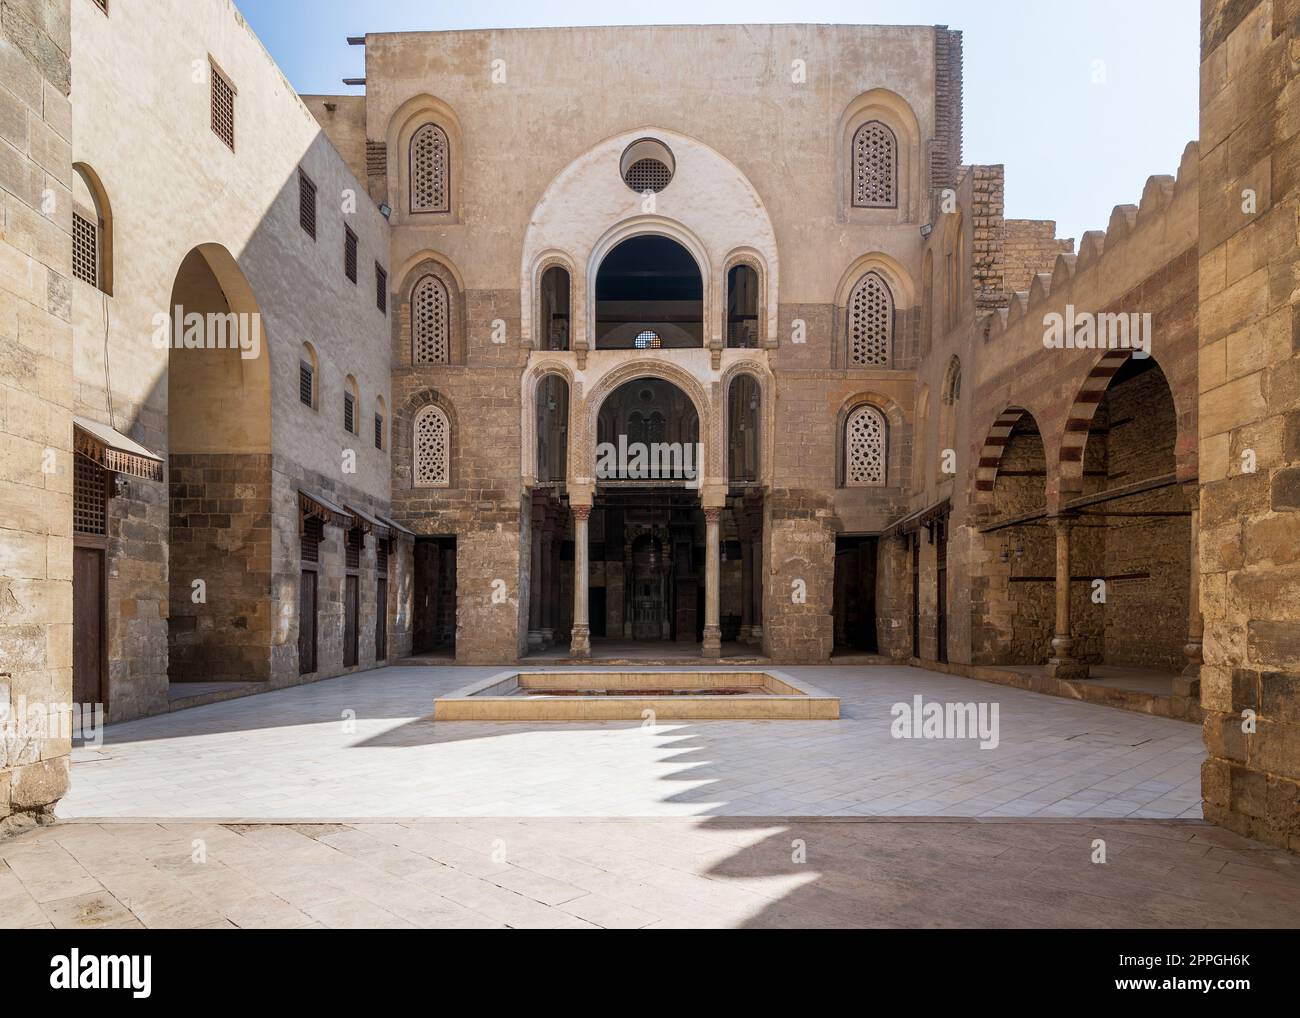 Main Iwan at courtyard of public historic mosque of Sultan Qalawun, Moez Street, Cairo, Egypt Stock Photo